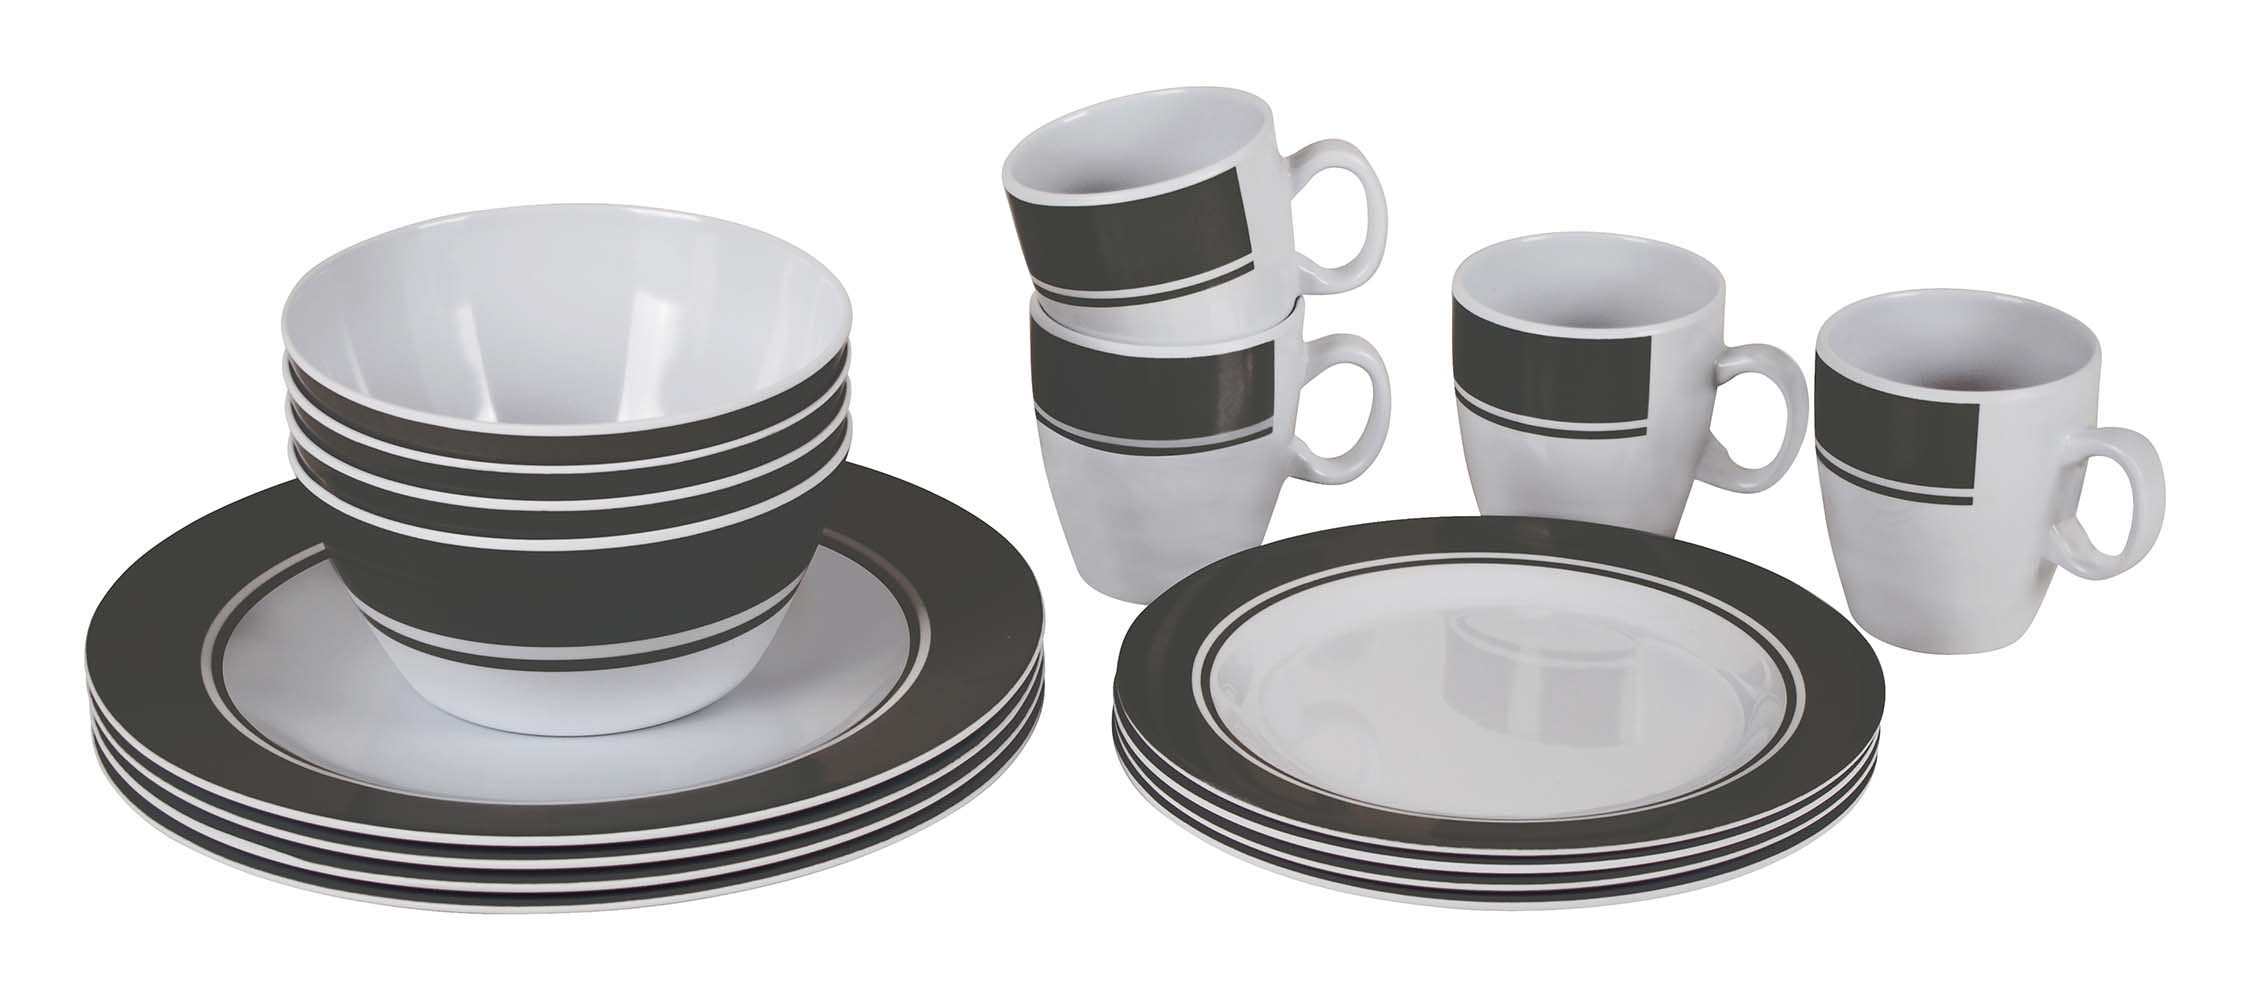 6181080 A 16-piece tableware set made of 100% melamine. This high-quality melamine soup bowl is virtually unbreakable and very light in weight. The cup is also scratch resistant and dishwasher safe. This stylish set is suitable for 4 people and consists of 4 plates, 4 breakfast plates, 4 bowls and 4 mugs.